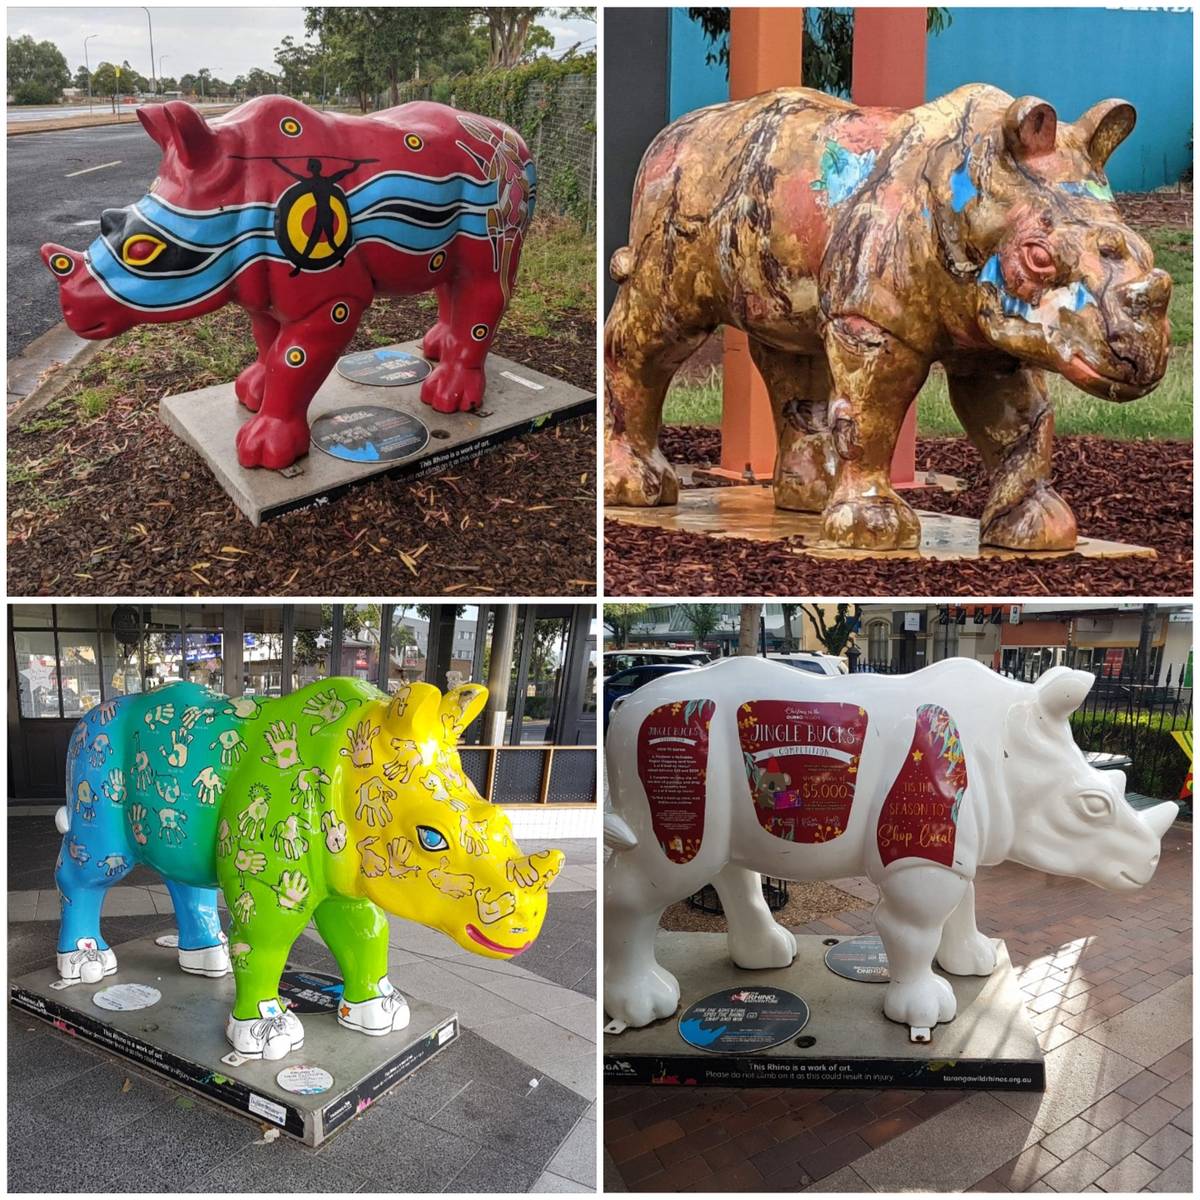 These sculptures were all over town. They sell these to businesses to create a tourist trail and help raise money for the rhino breeding program.